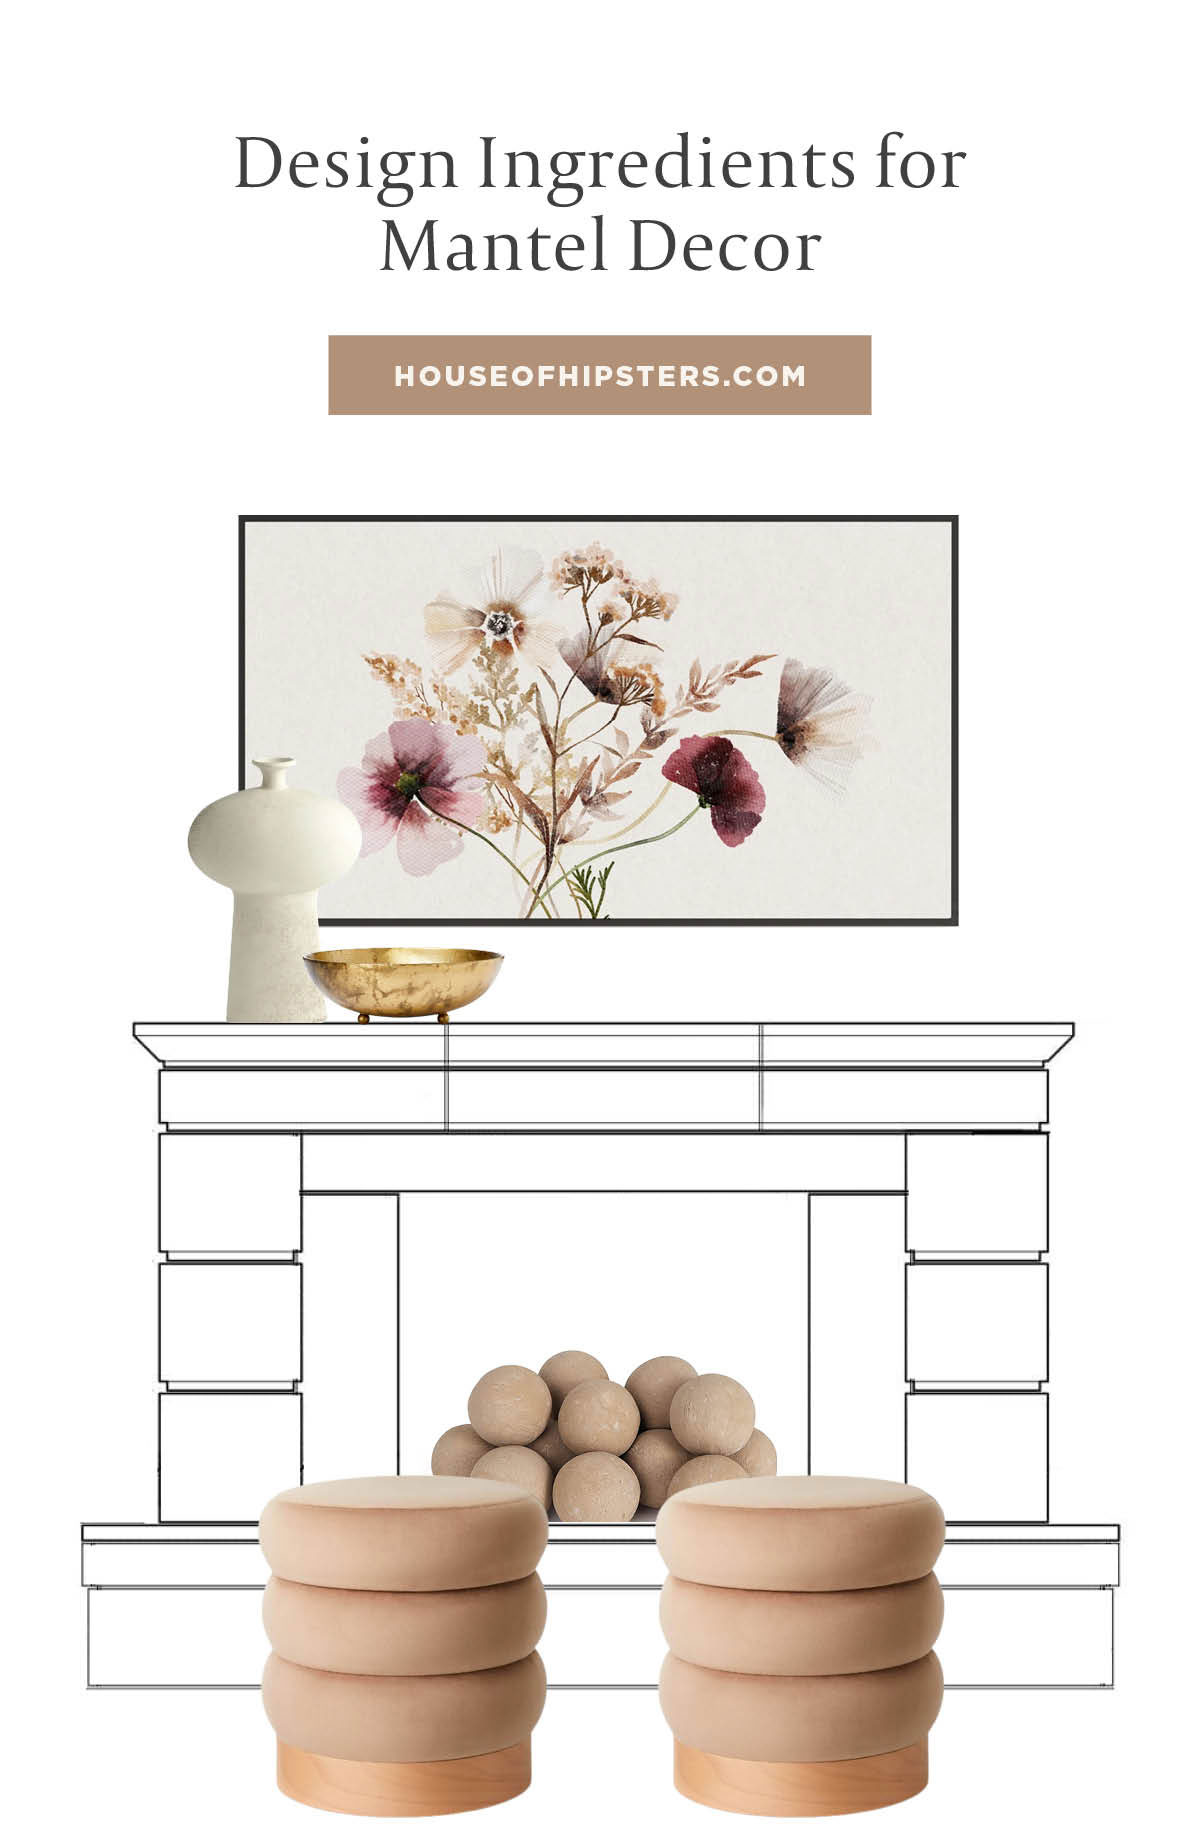 Style your mantel with this design mood board